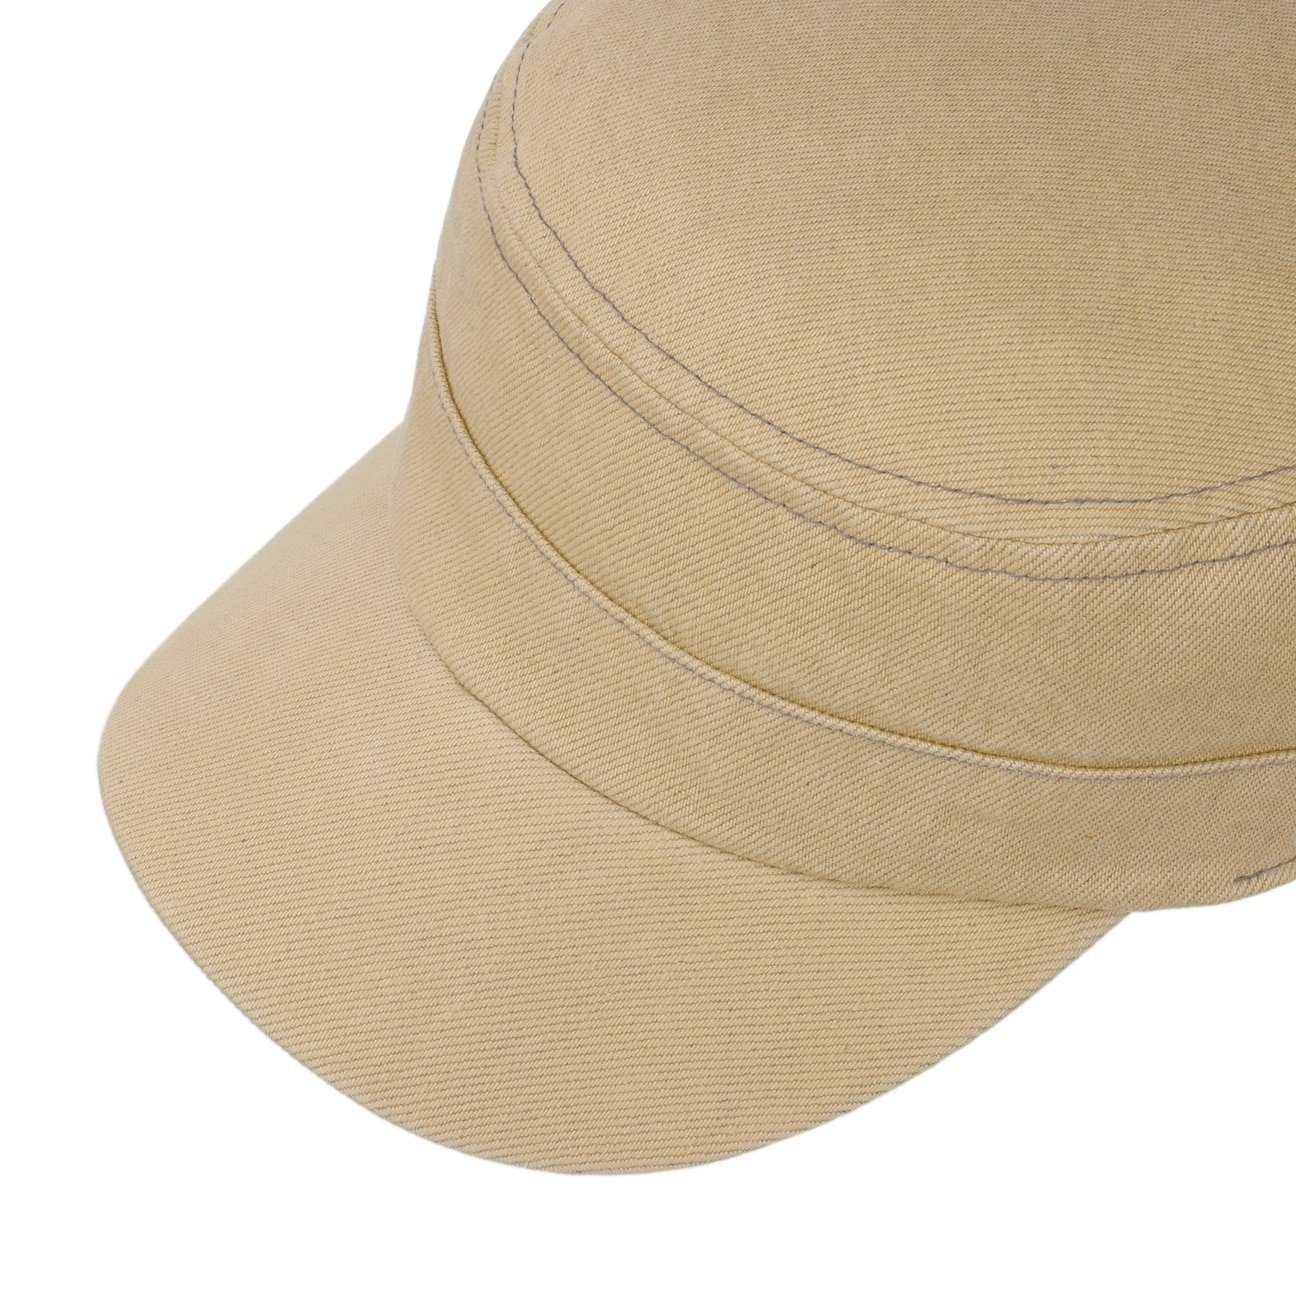 Stetson Army Cap (1-St) in Schirm, EU Armycap the mit Made